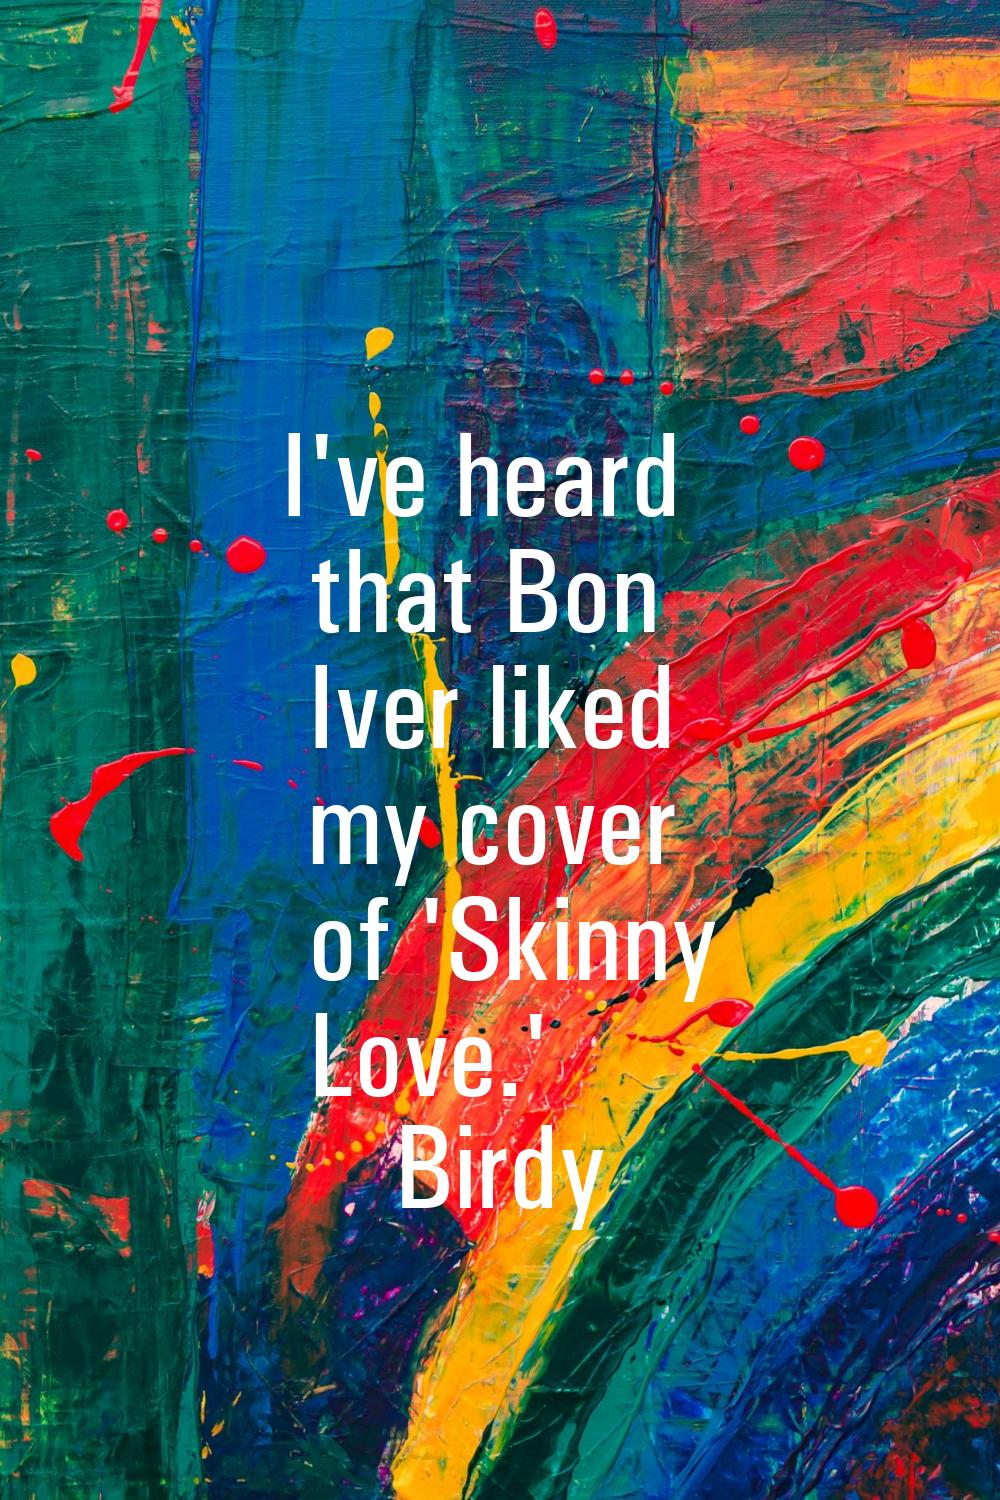 I've heard that Bon Iver liked my cover of 'Skinny Love.'